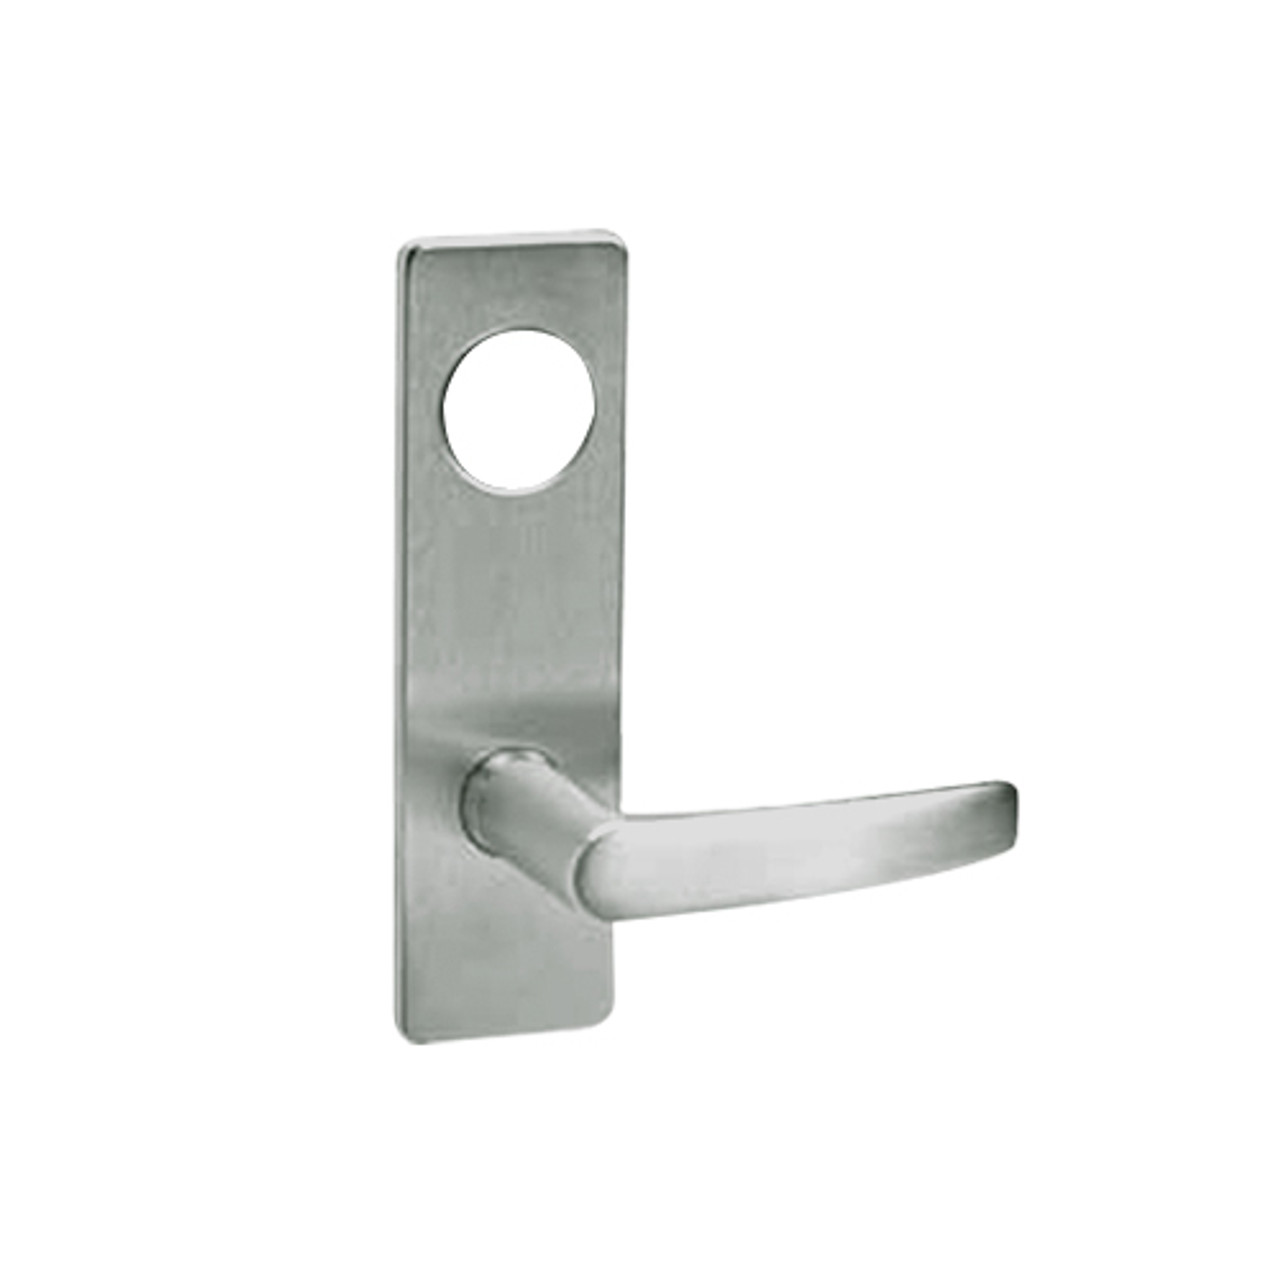 ML2042-ASM-619-CL7 Corbin Russwin ML2000 Series IC 7-Pin Less Core Mortise Entrance Locksets with Armstrong Lever in Satin Nickel